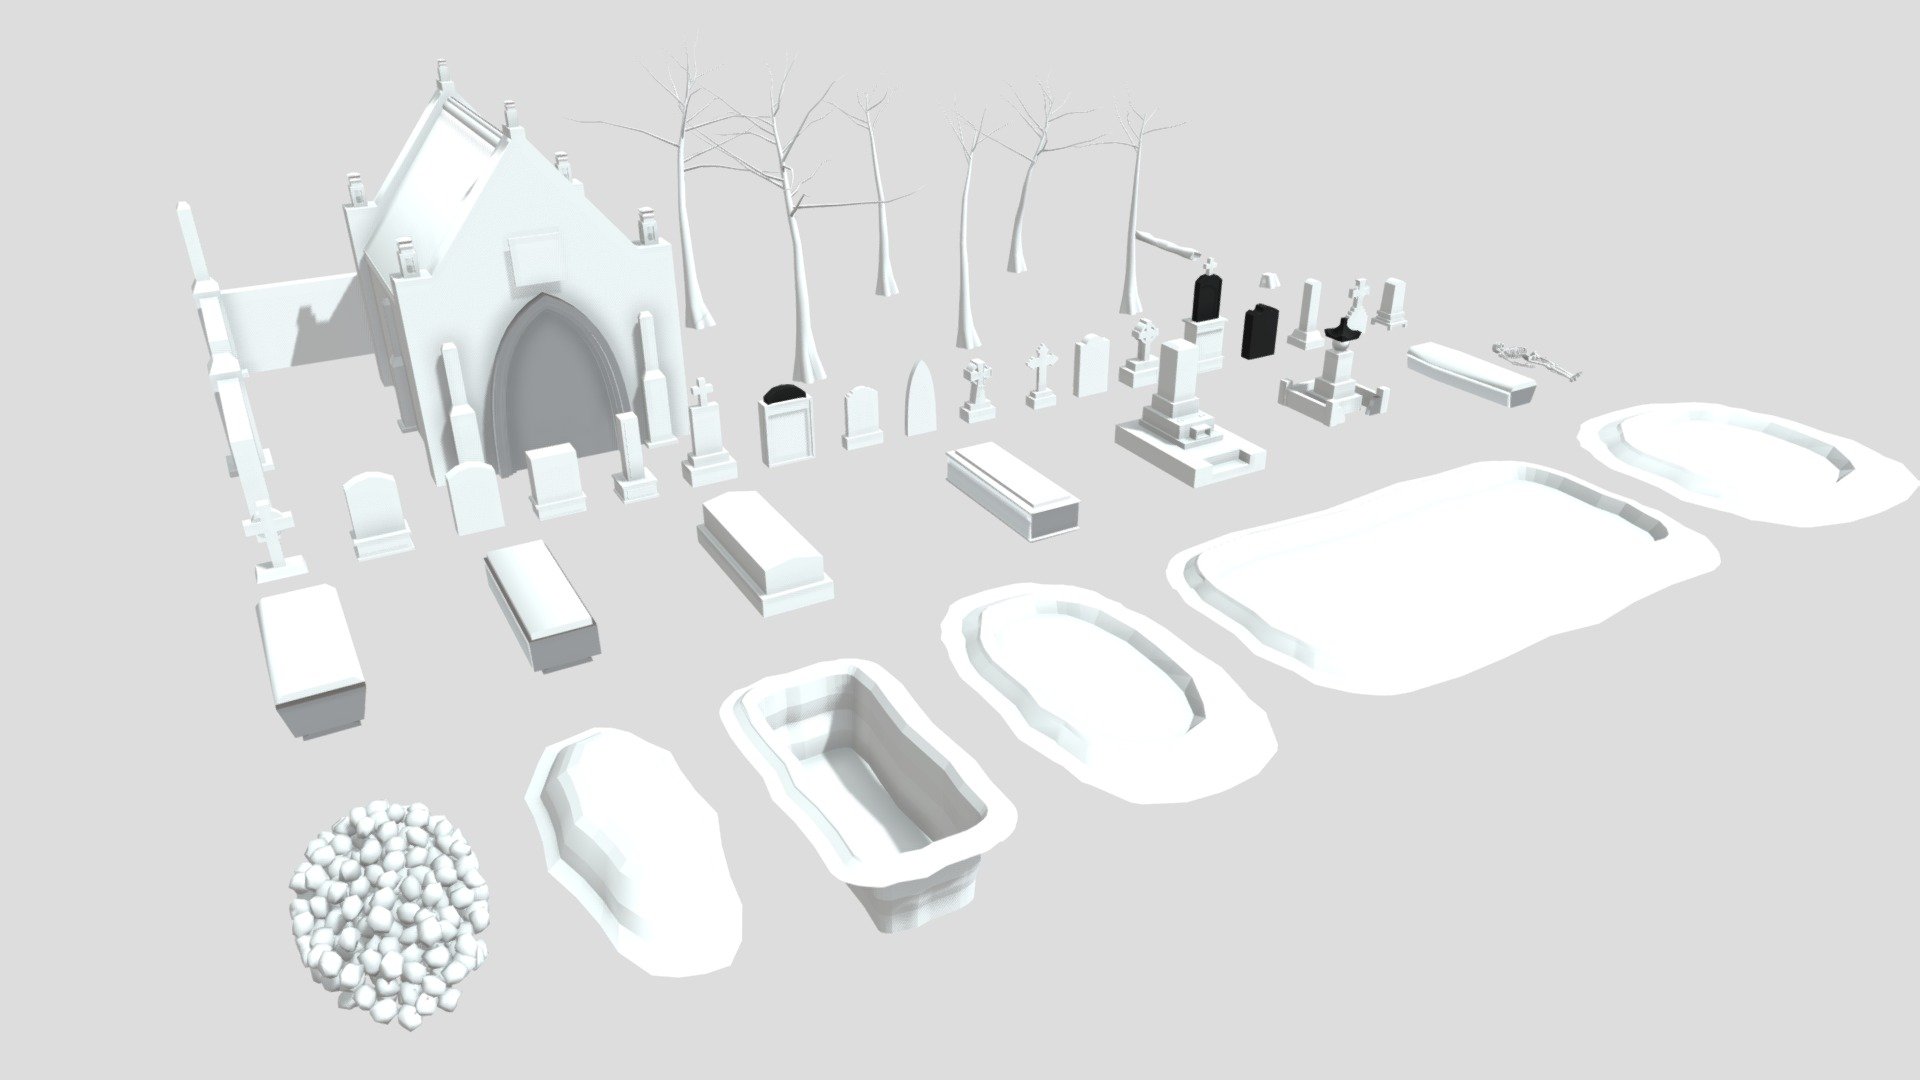 43 Low Poly Cemetery props Collection gravestone grave tombstone stone cemetery Graveyard death dead lowpoly tomb halloween crypt headstone cemetery horror graveyard landscape mausaleum churchyard church funeral grave MAX 2016, Max 2019, OBJ and FBX - 43 Low Poly Cemetery Collection - Buy Royalty Free 3D model by kopofx 3d model